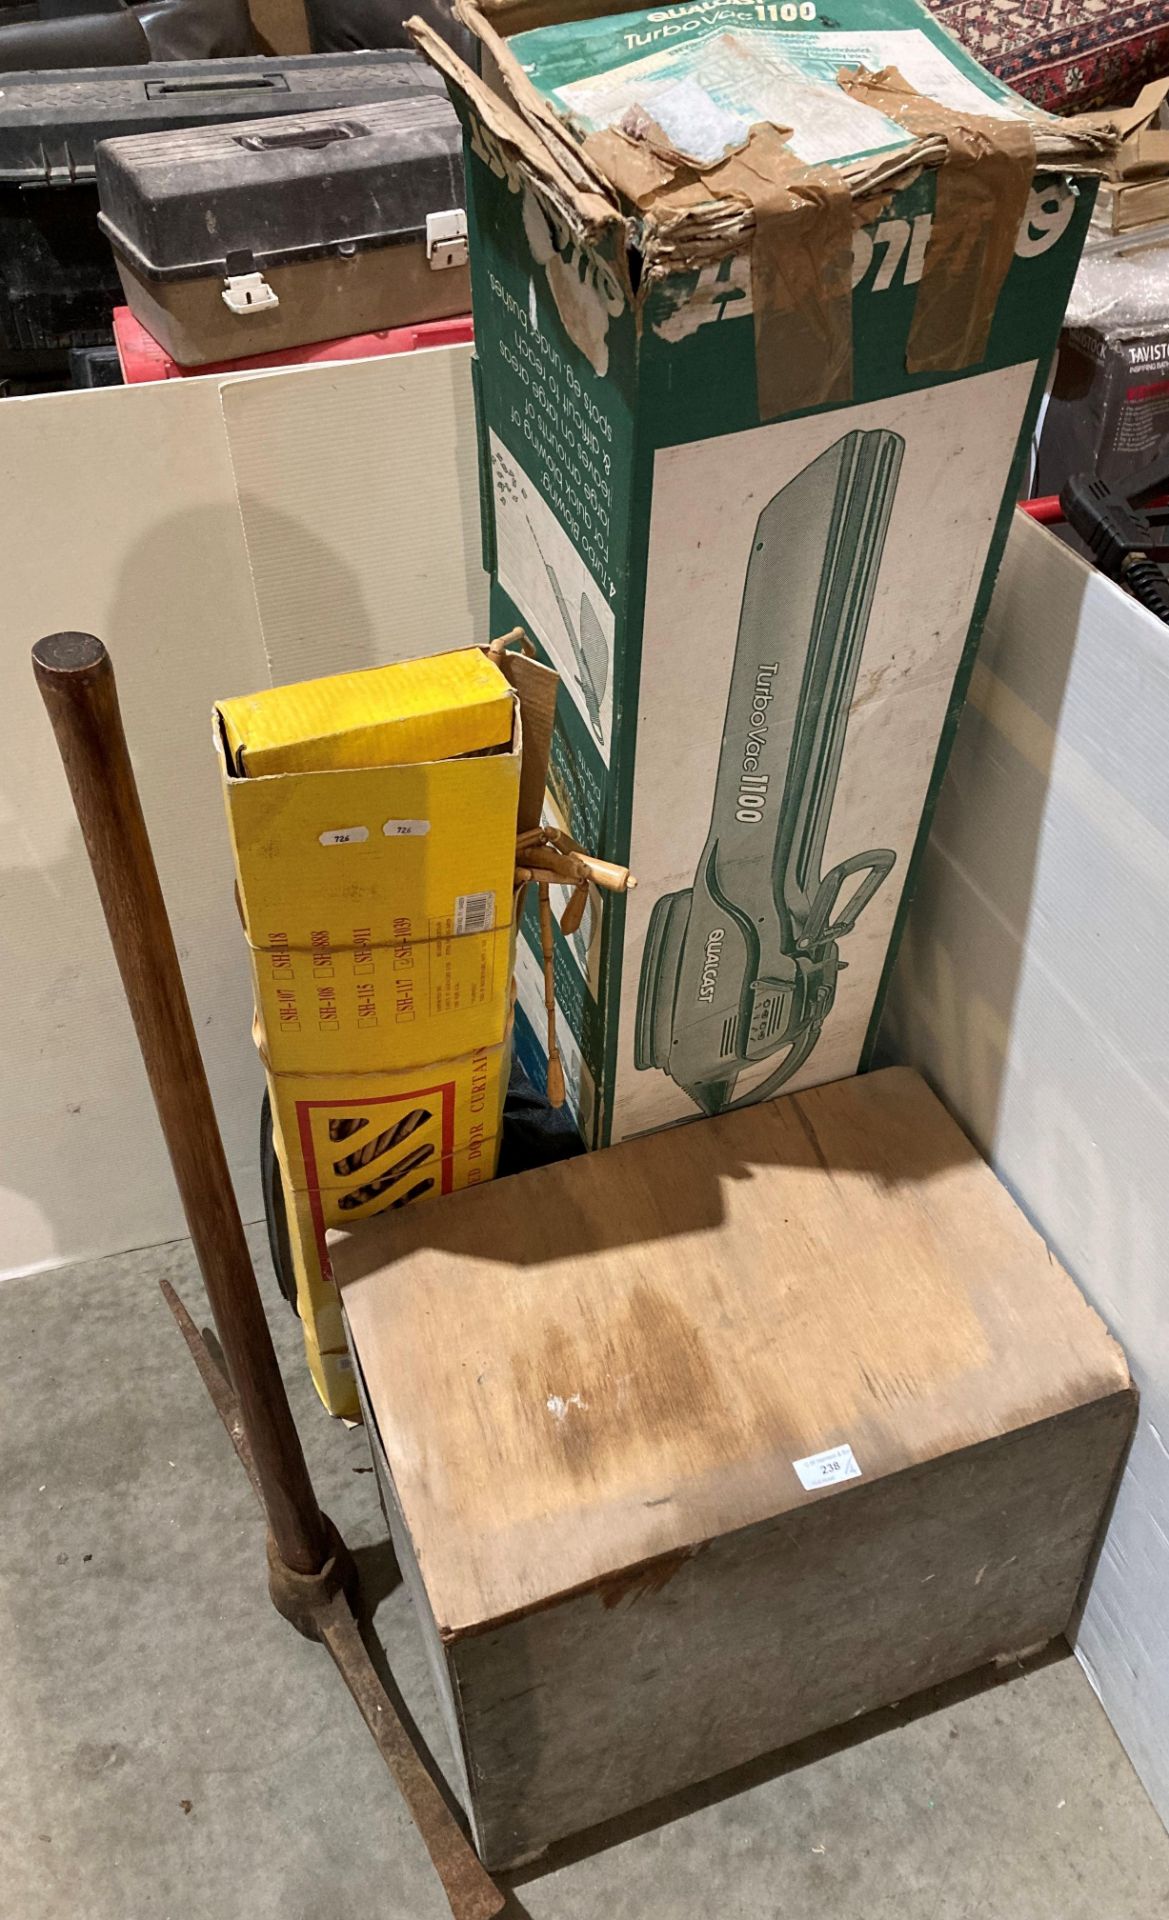 Wooden lift-top box with assorted hand tools and a Qualcast Turbo Vac 1100,